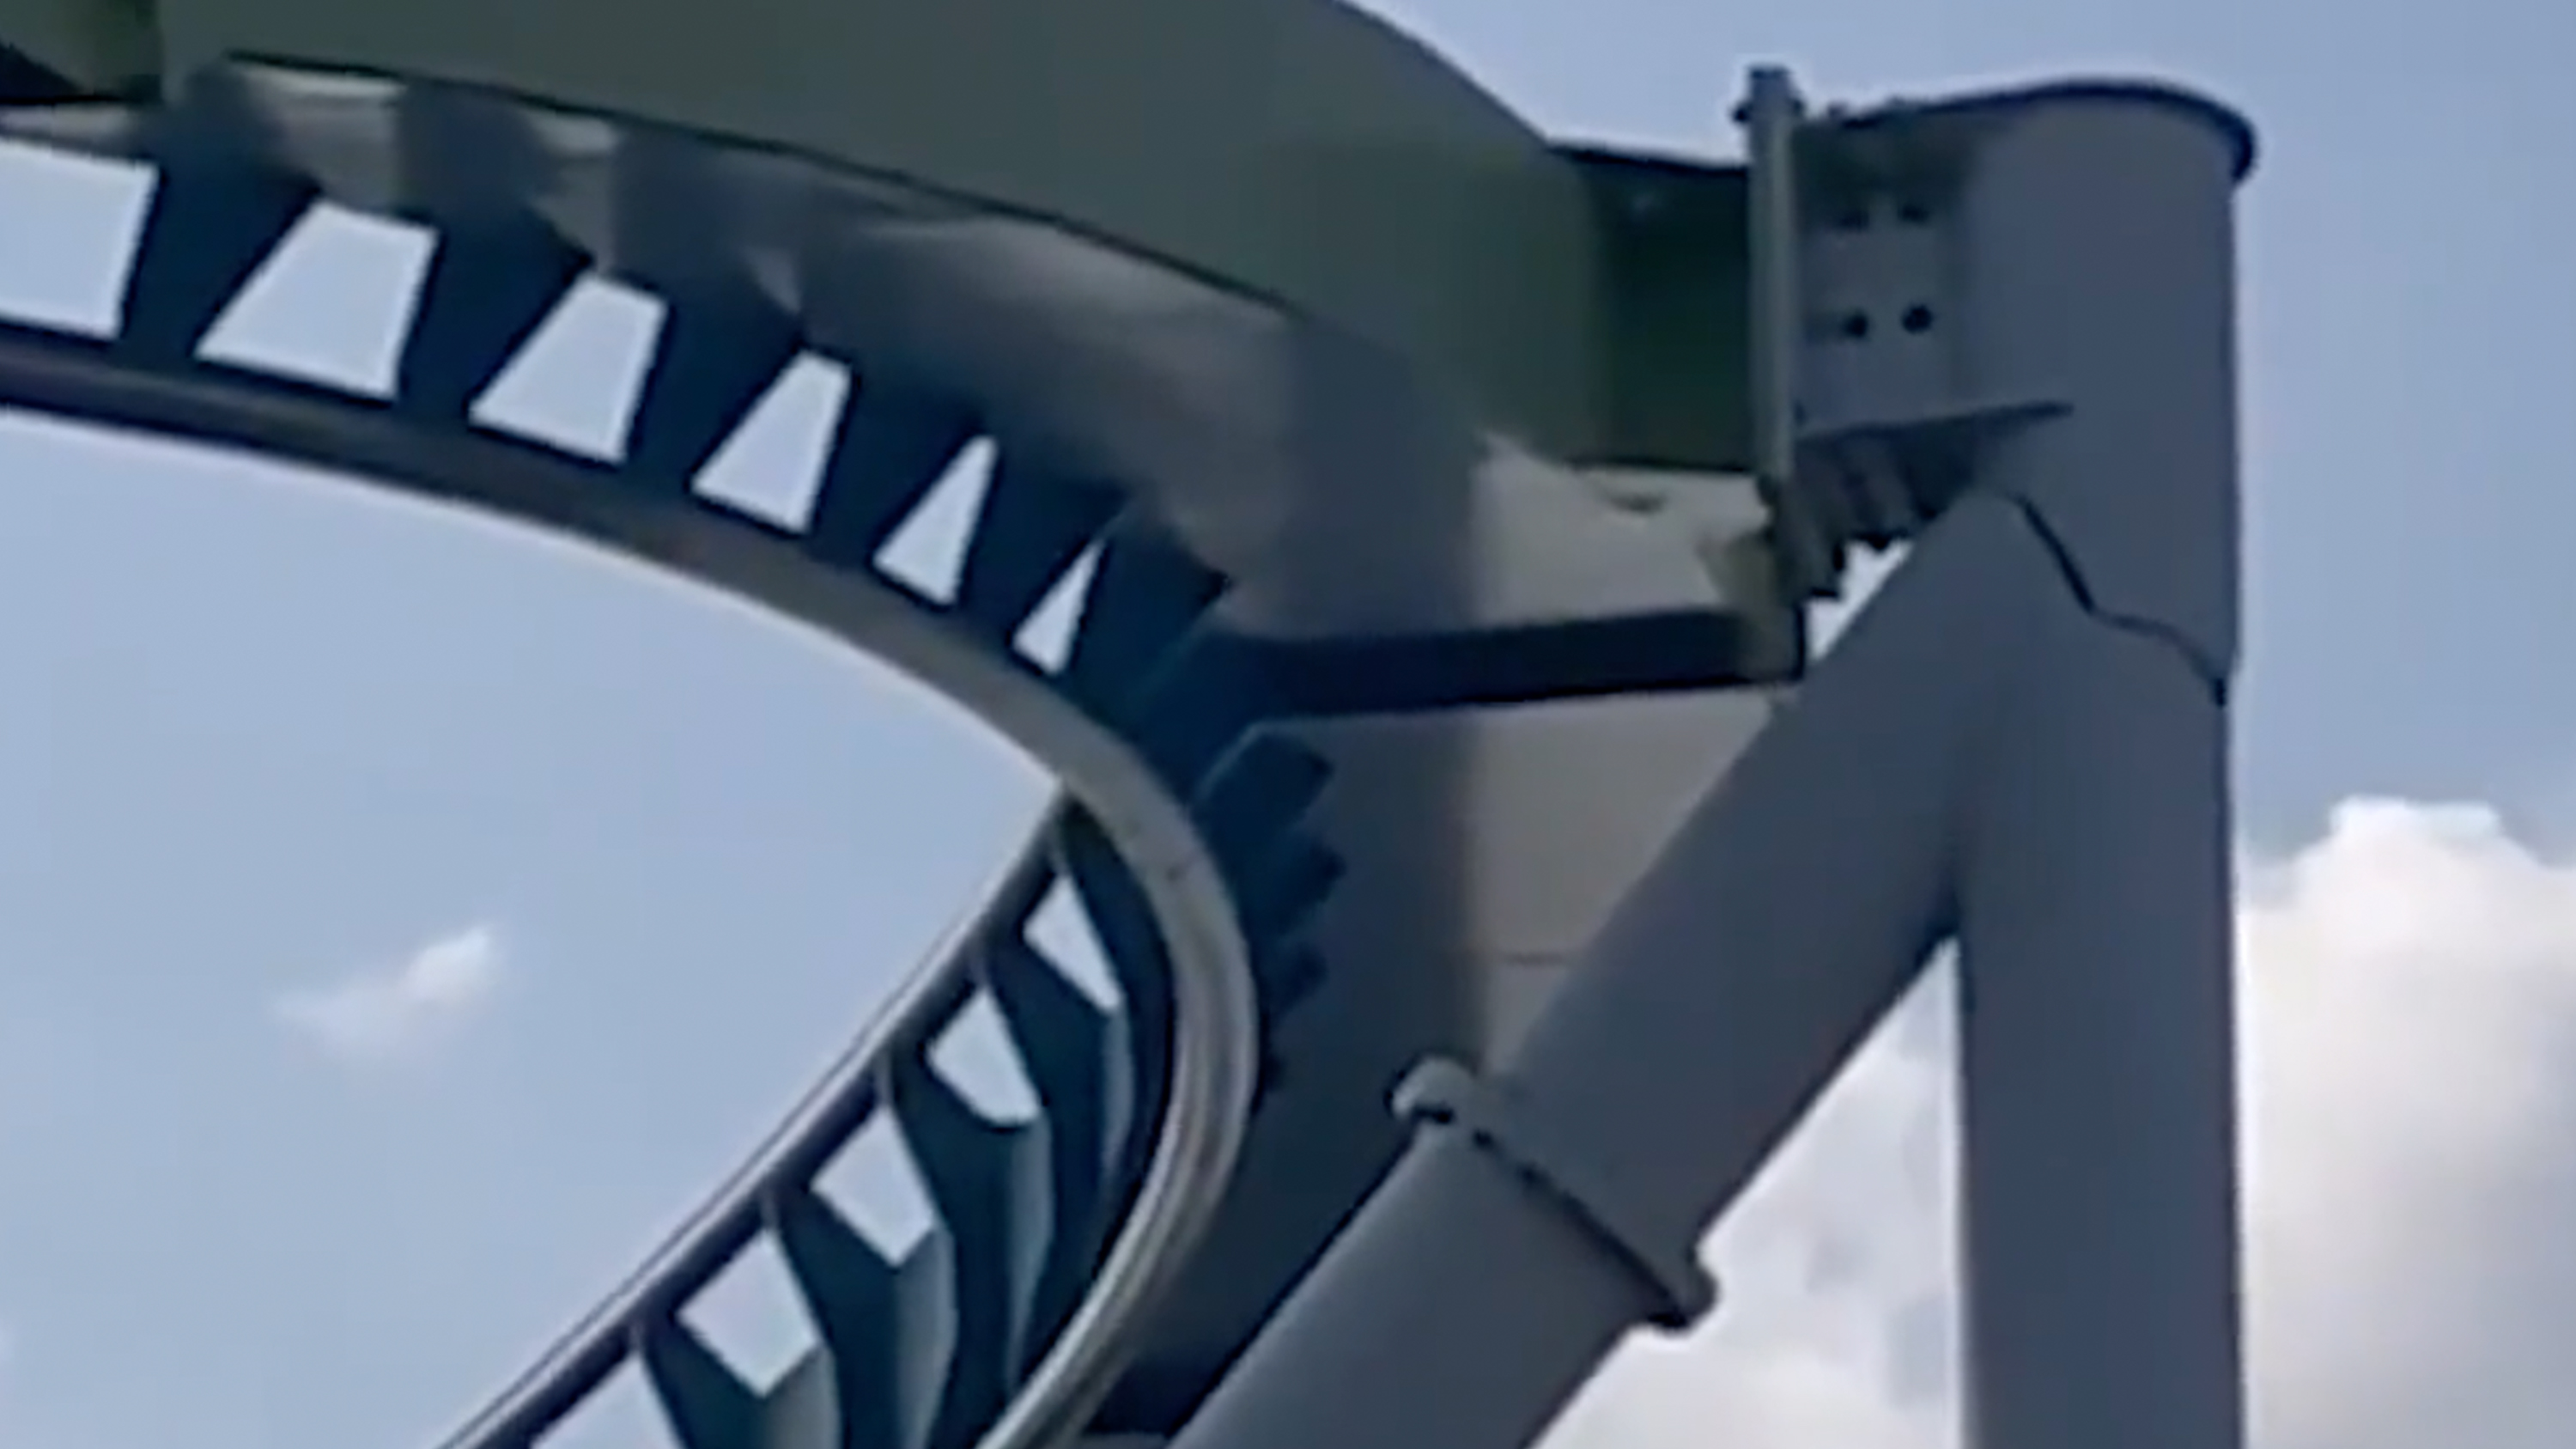 Scary Video Of Big Crack Leads To Roller Coaster Shutting Down